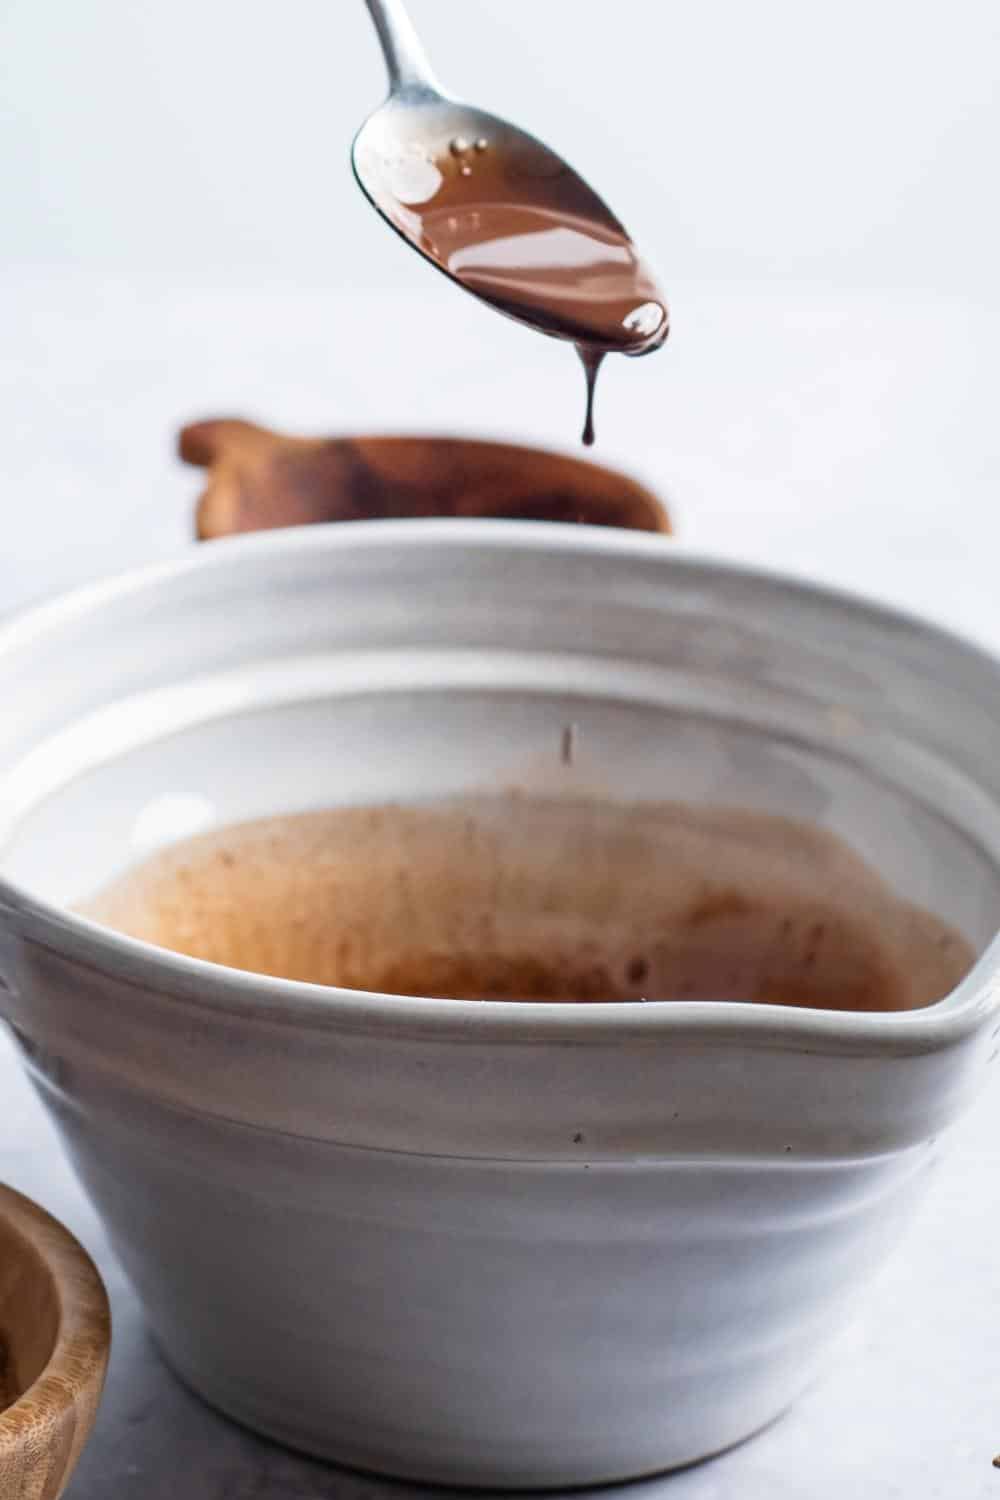 A spoon with melted chocolate on it over a bowl.